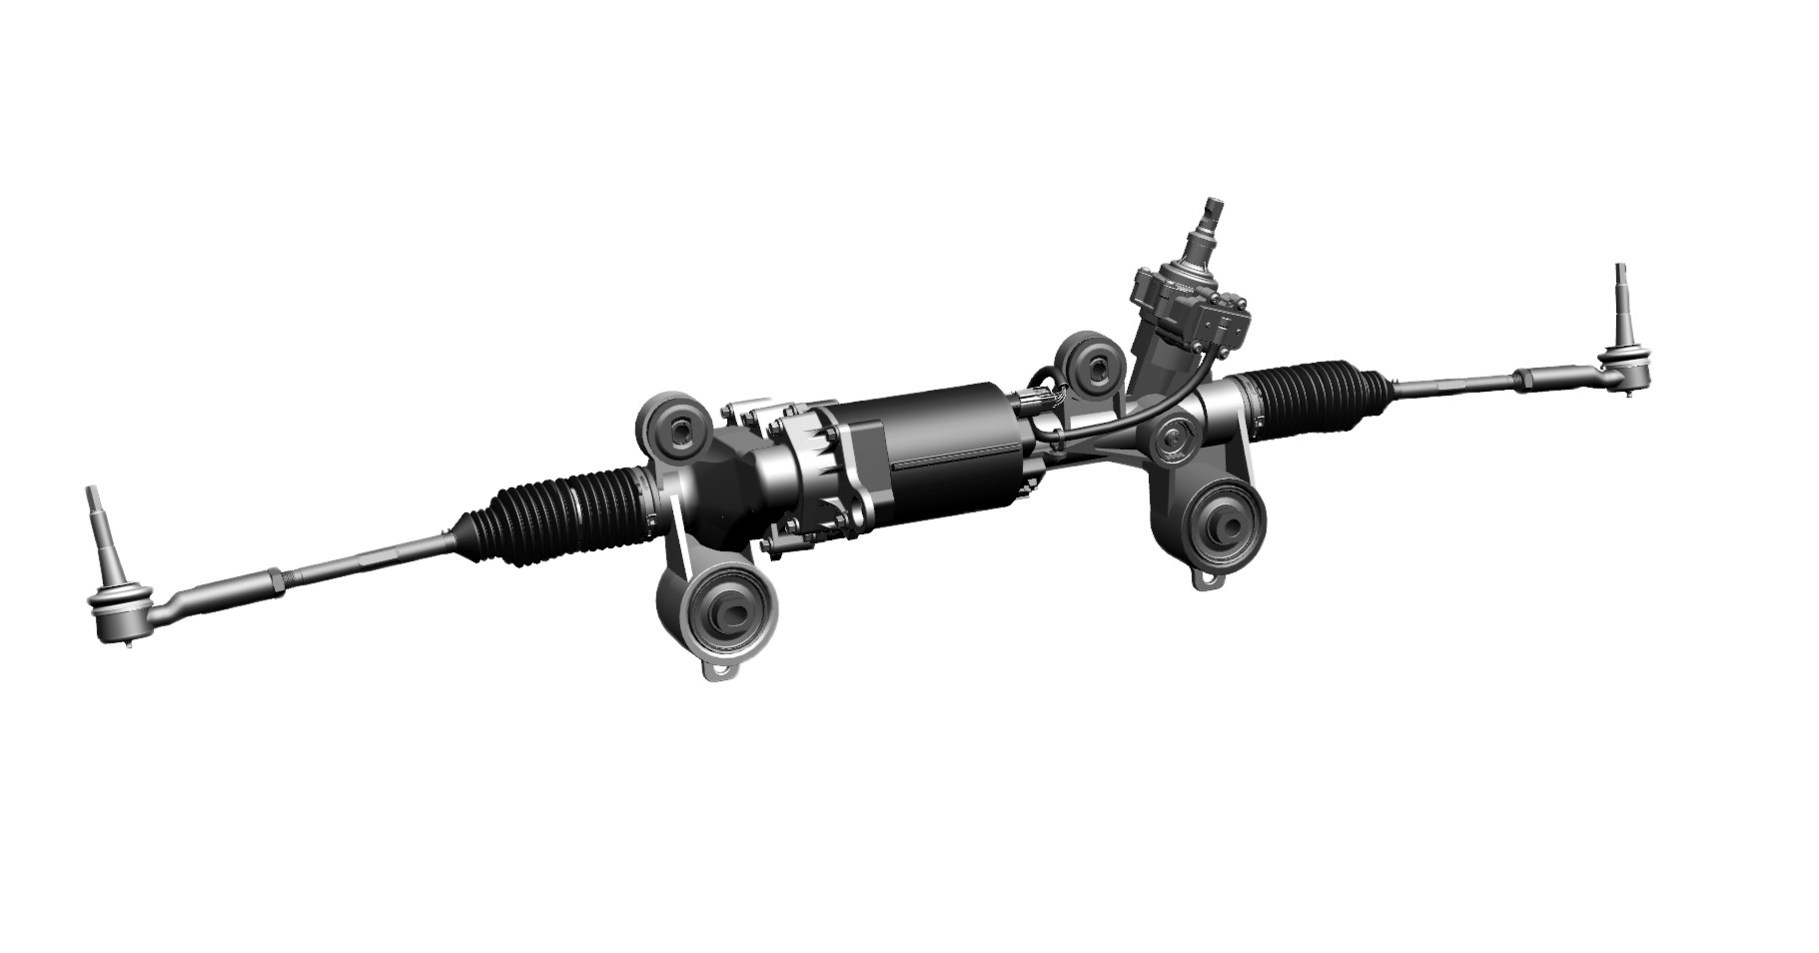 Nexteer Unveils New HighOutput Electric Power Steering System